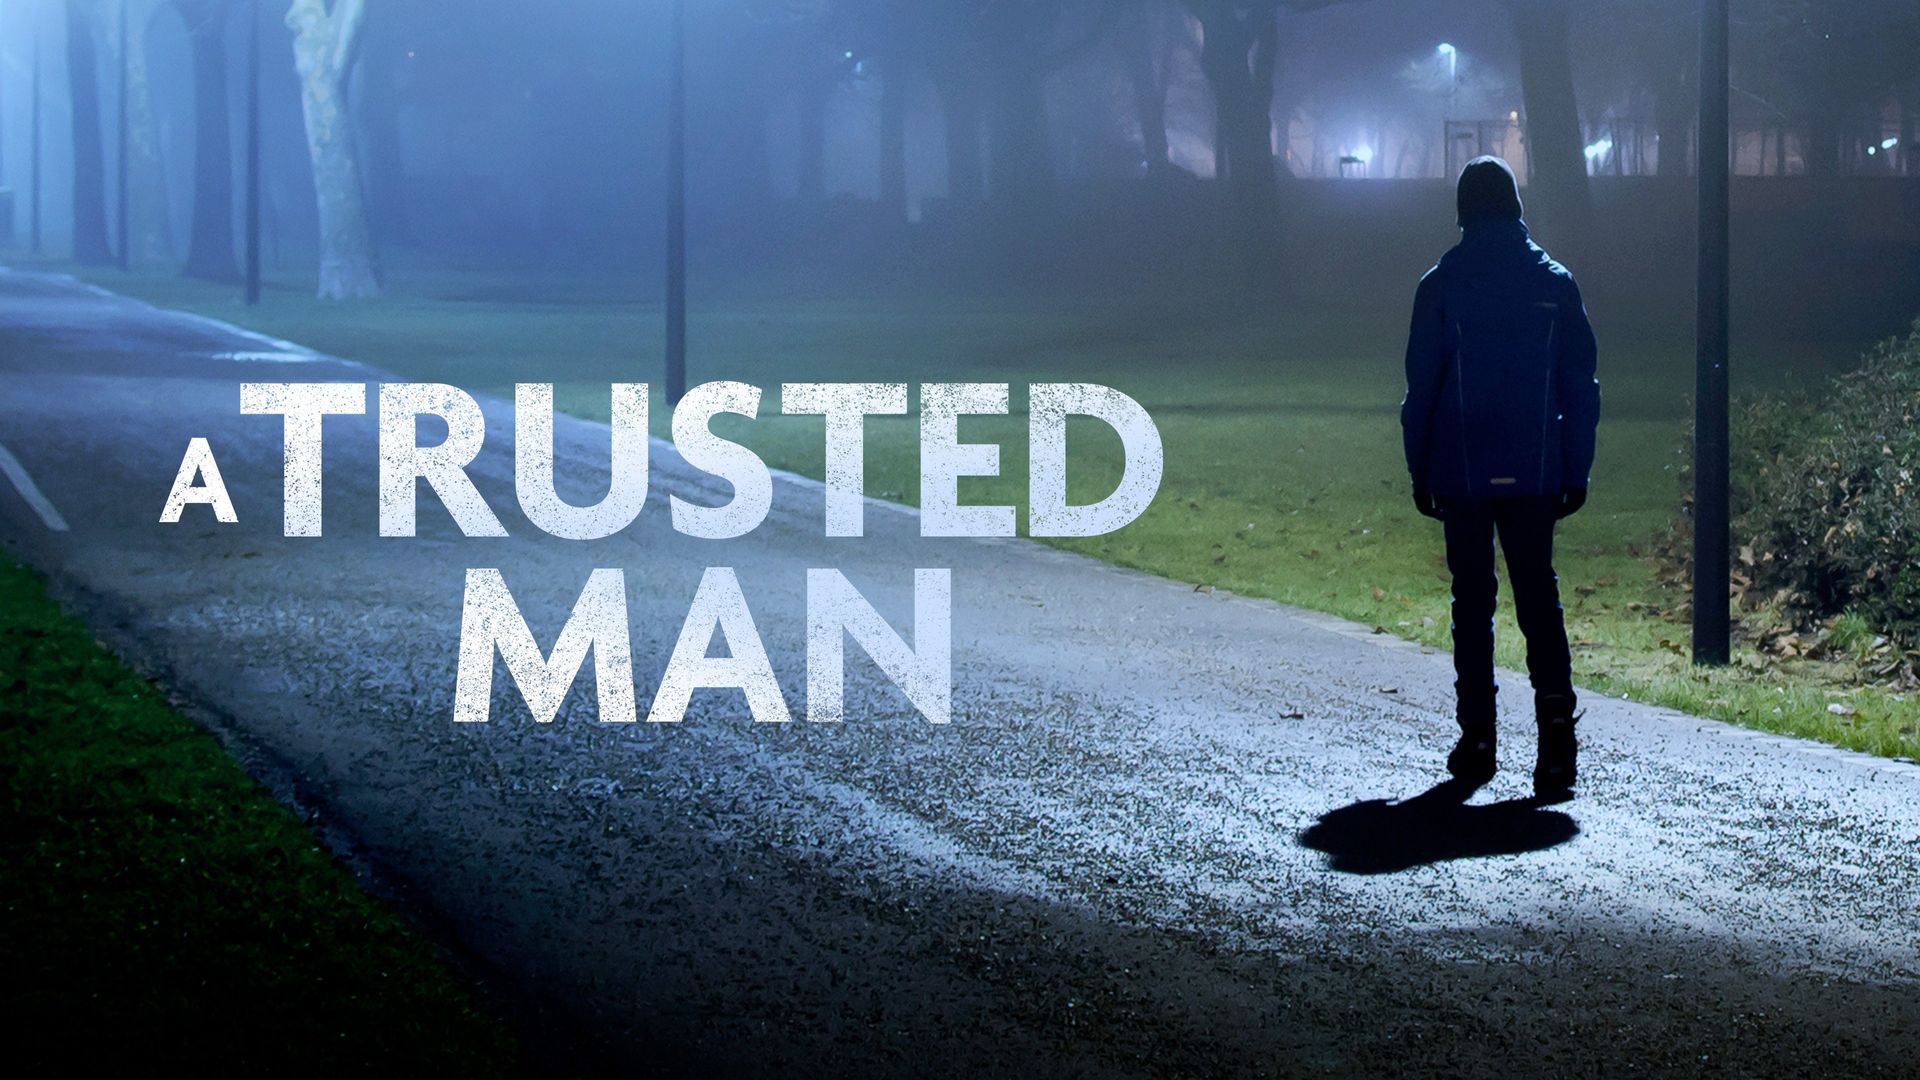 A Trusted Man Backdrop